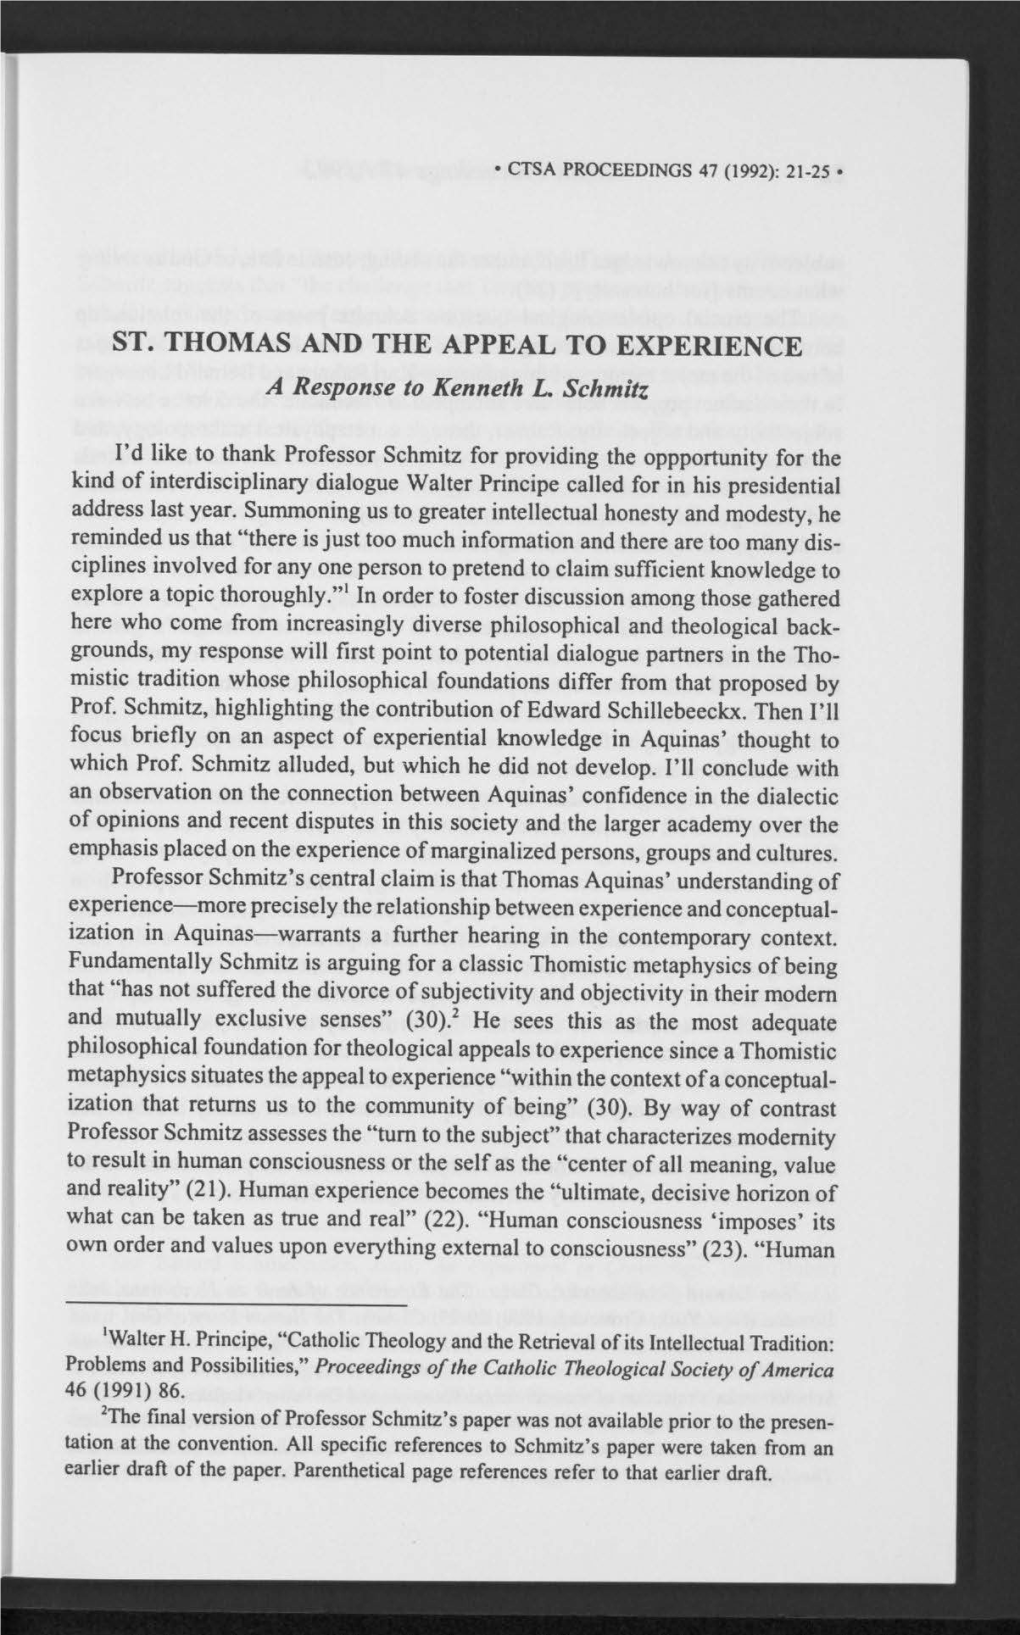 ST. THOMAS and the APPEAL to EXPERIENCE a Response to Kenneth L